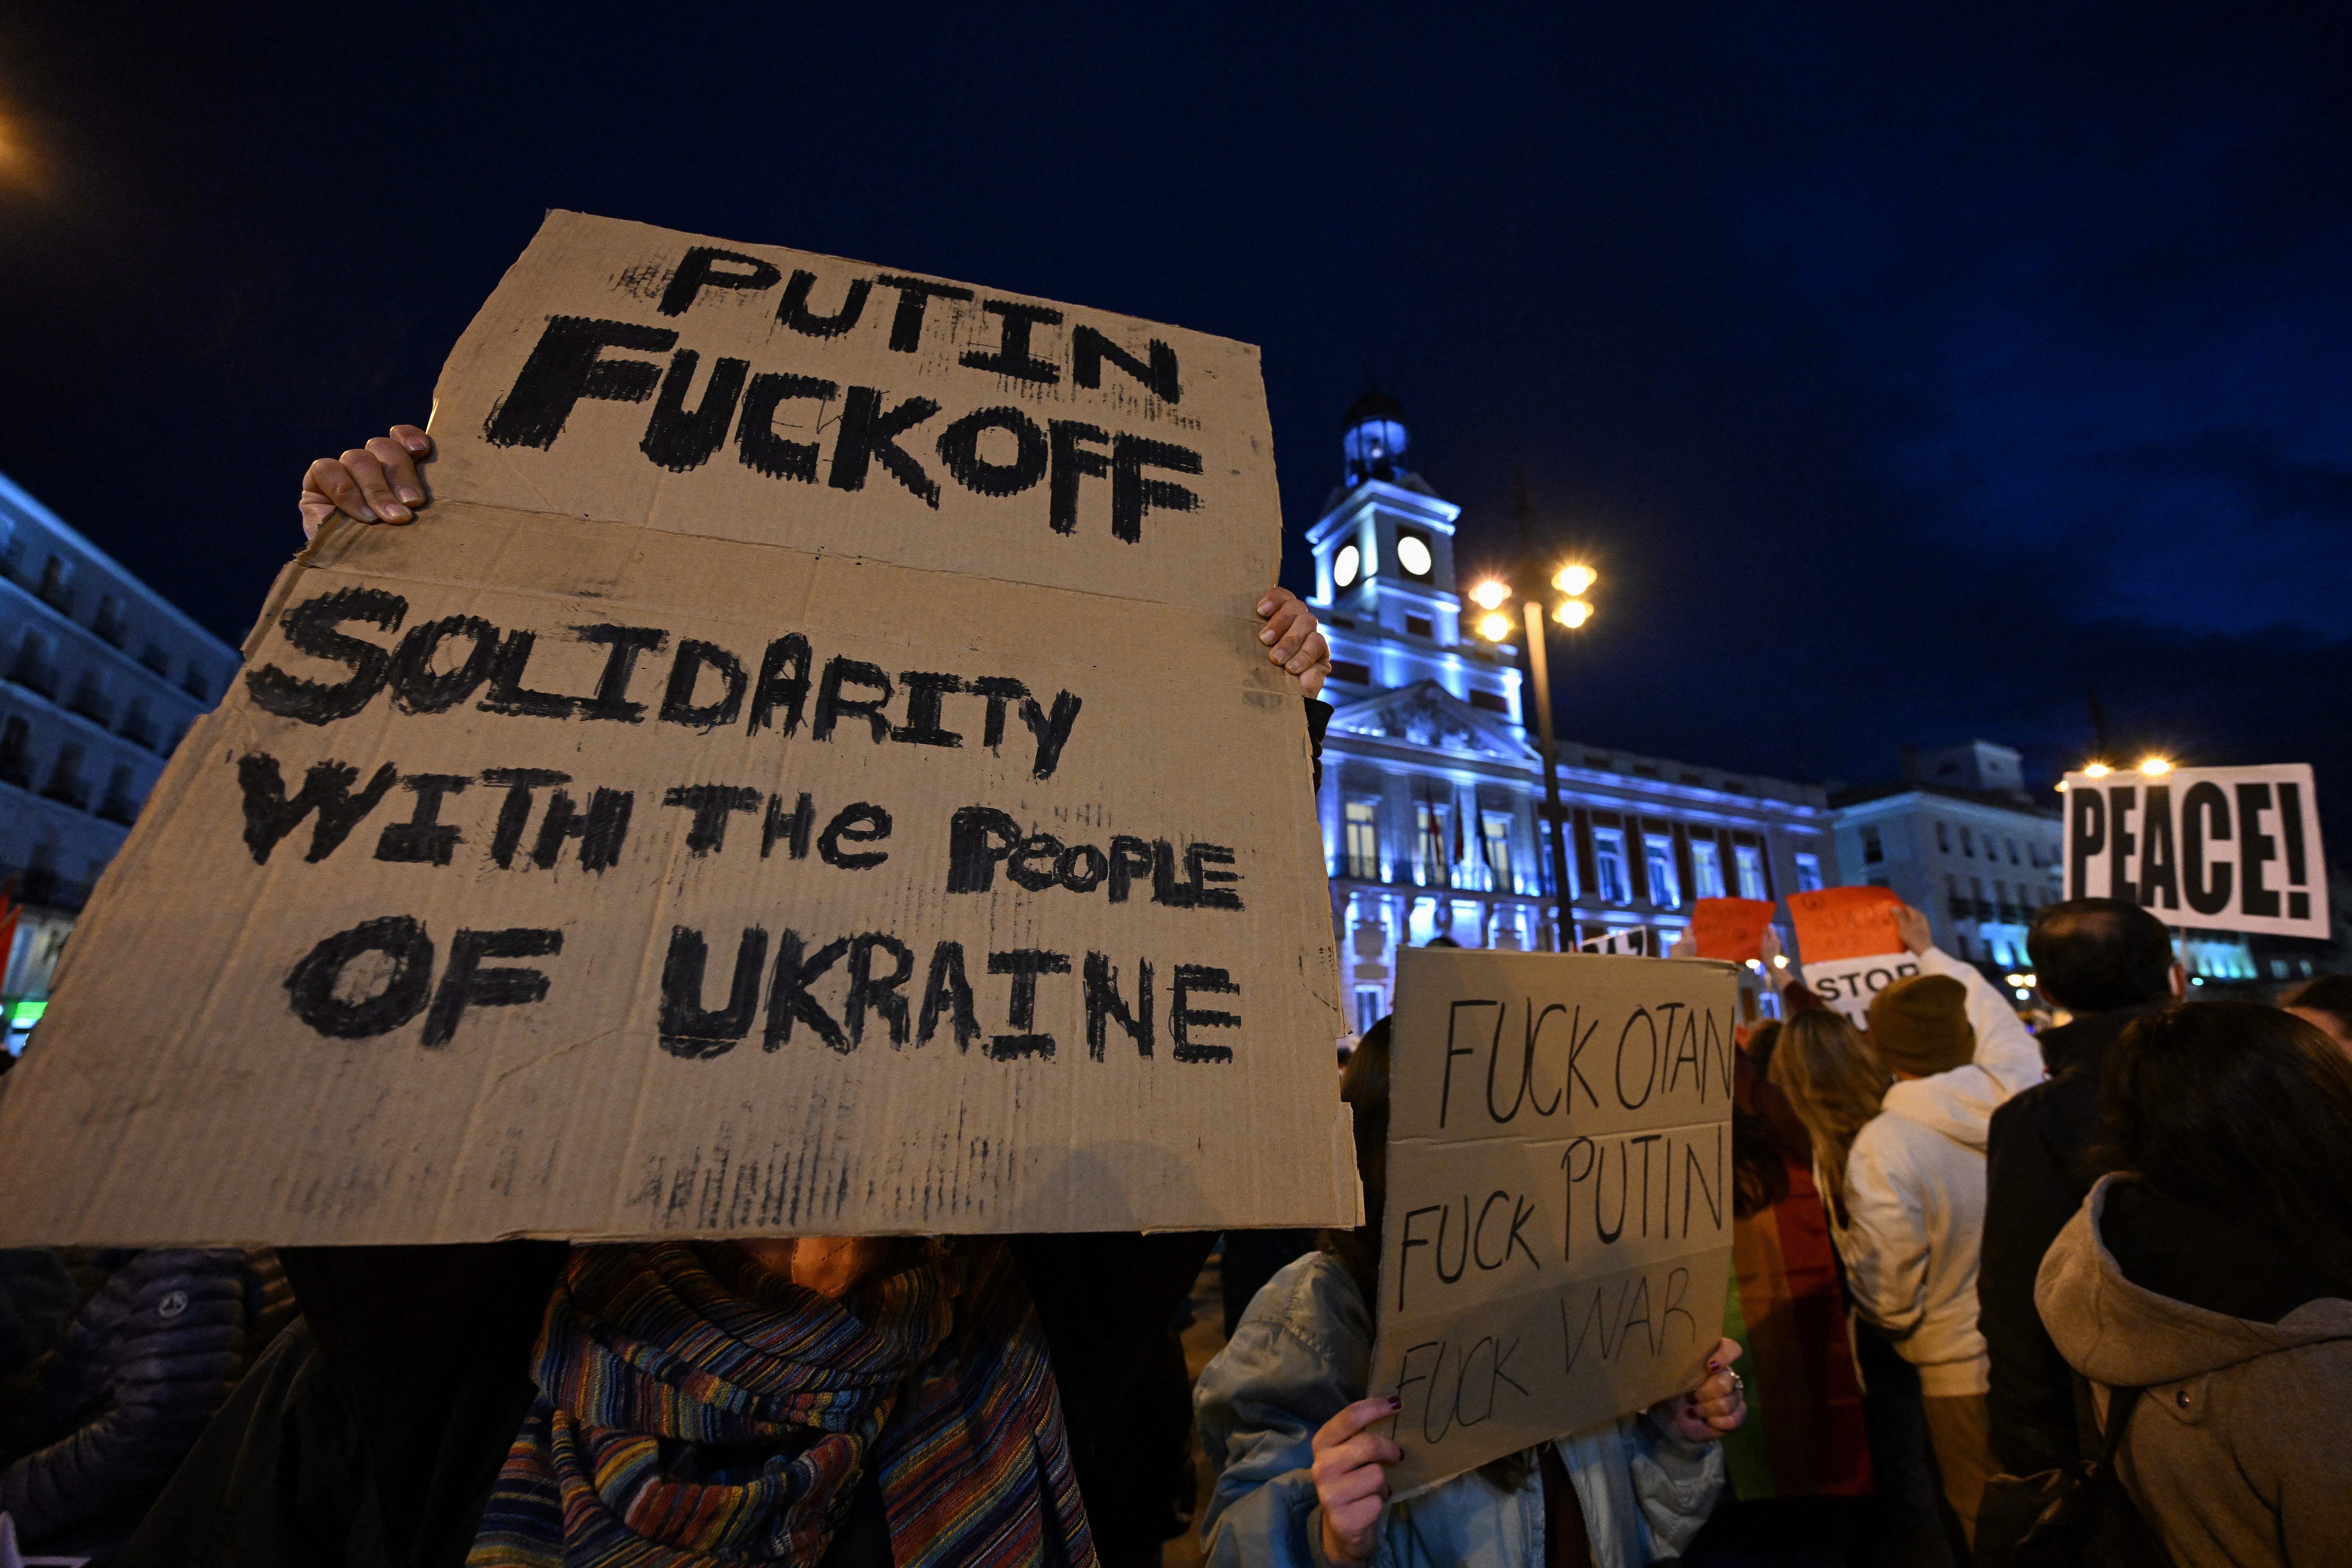 Photo of people holding signs, one of which says "Putin fuck off, solidarity with the people of Ukraine"